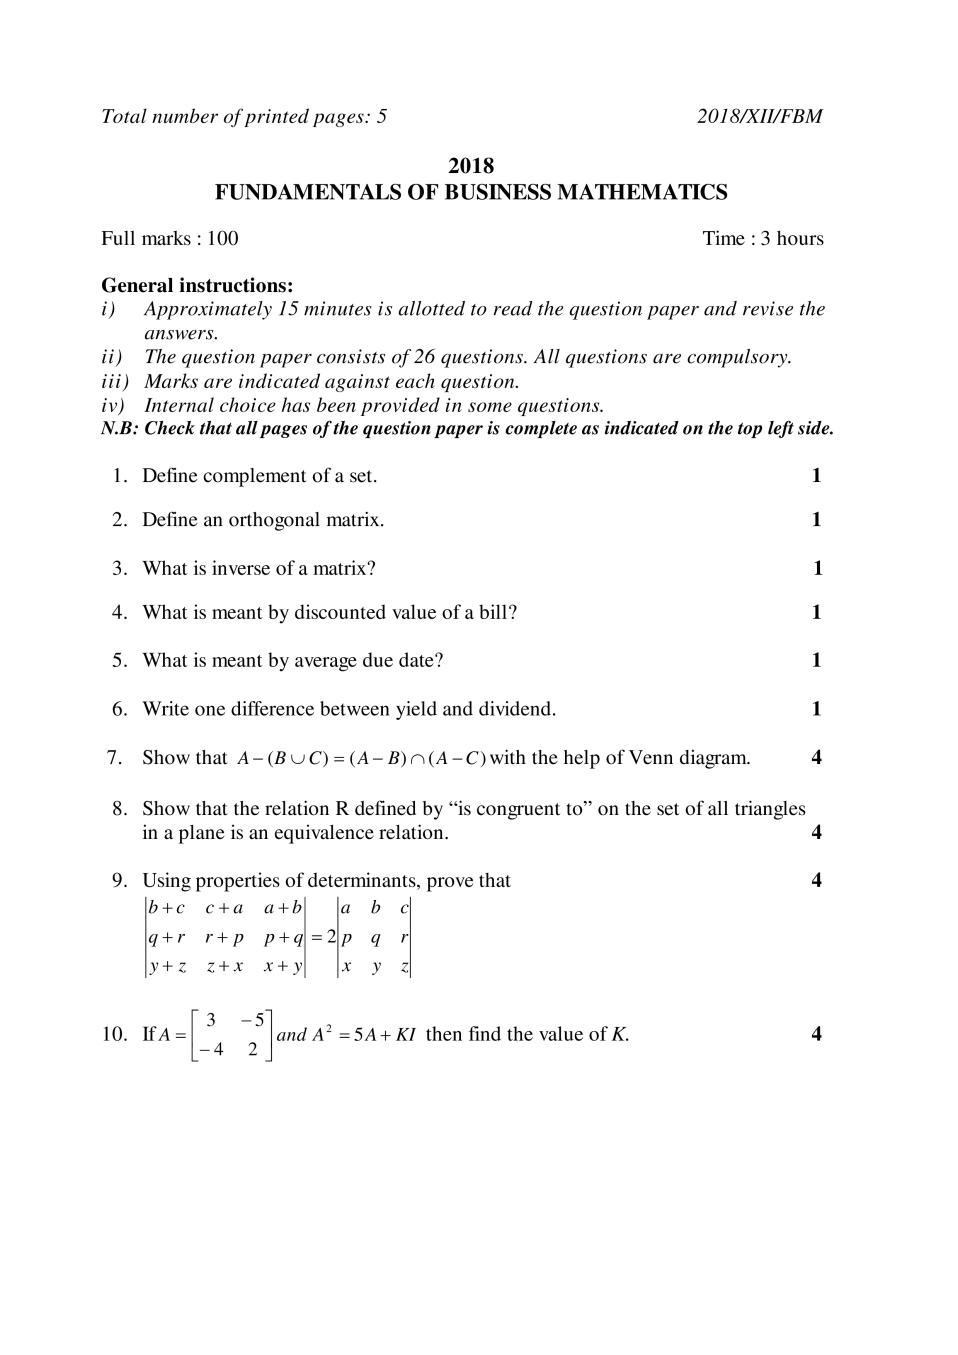 NBSE Class 12 Question Paper 2018 for Fund.of Business Maths - Page 1